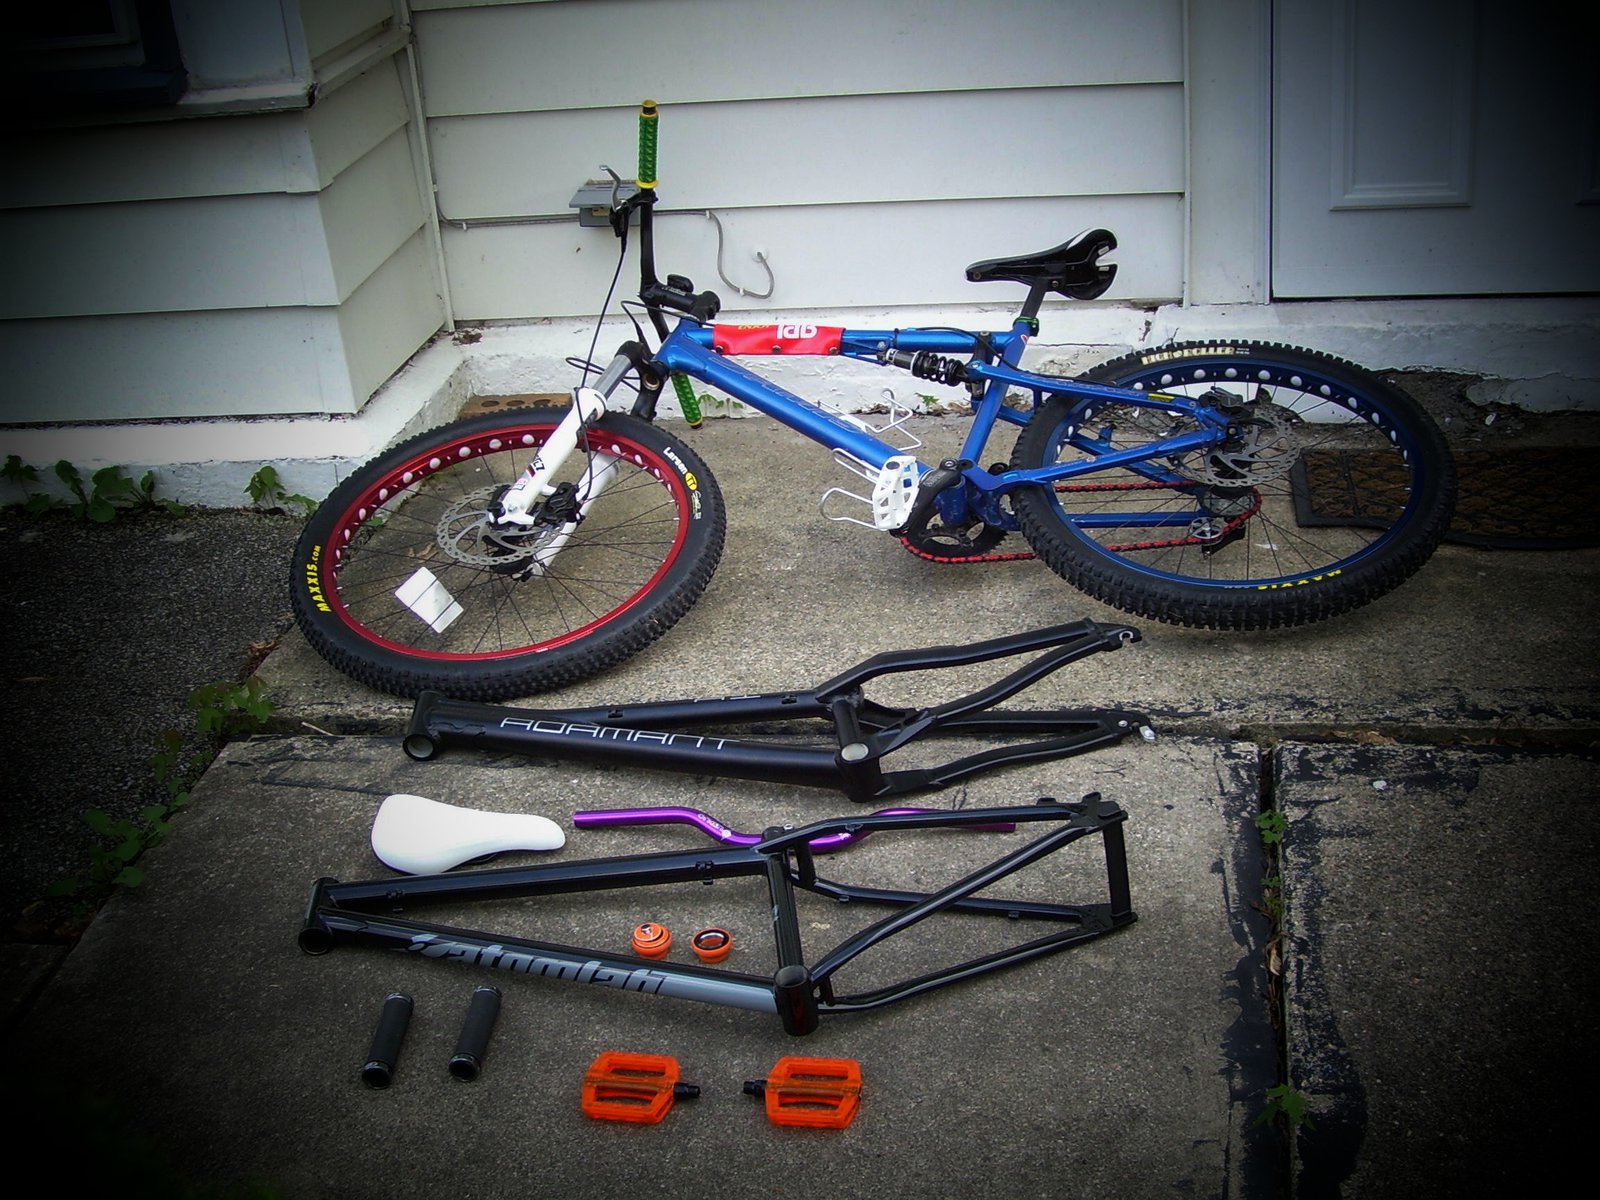 All my bike parts,not enough dividents to buy everything (progects)